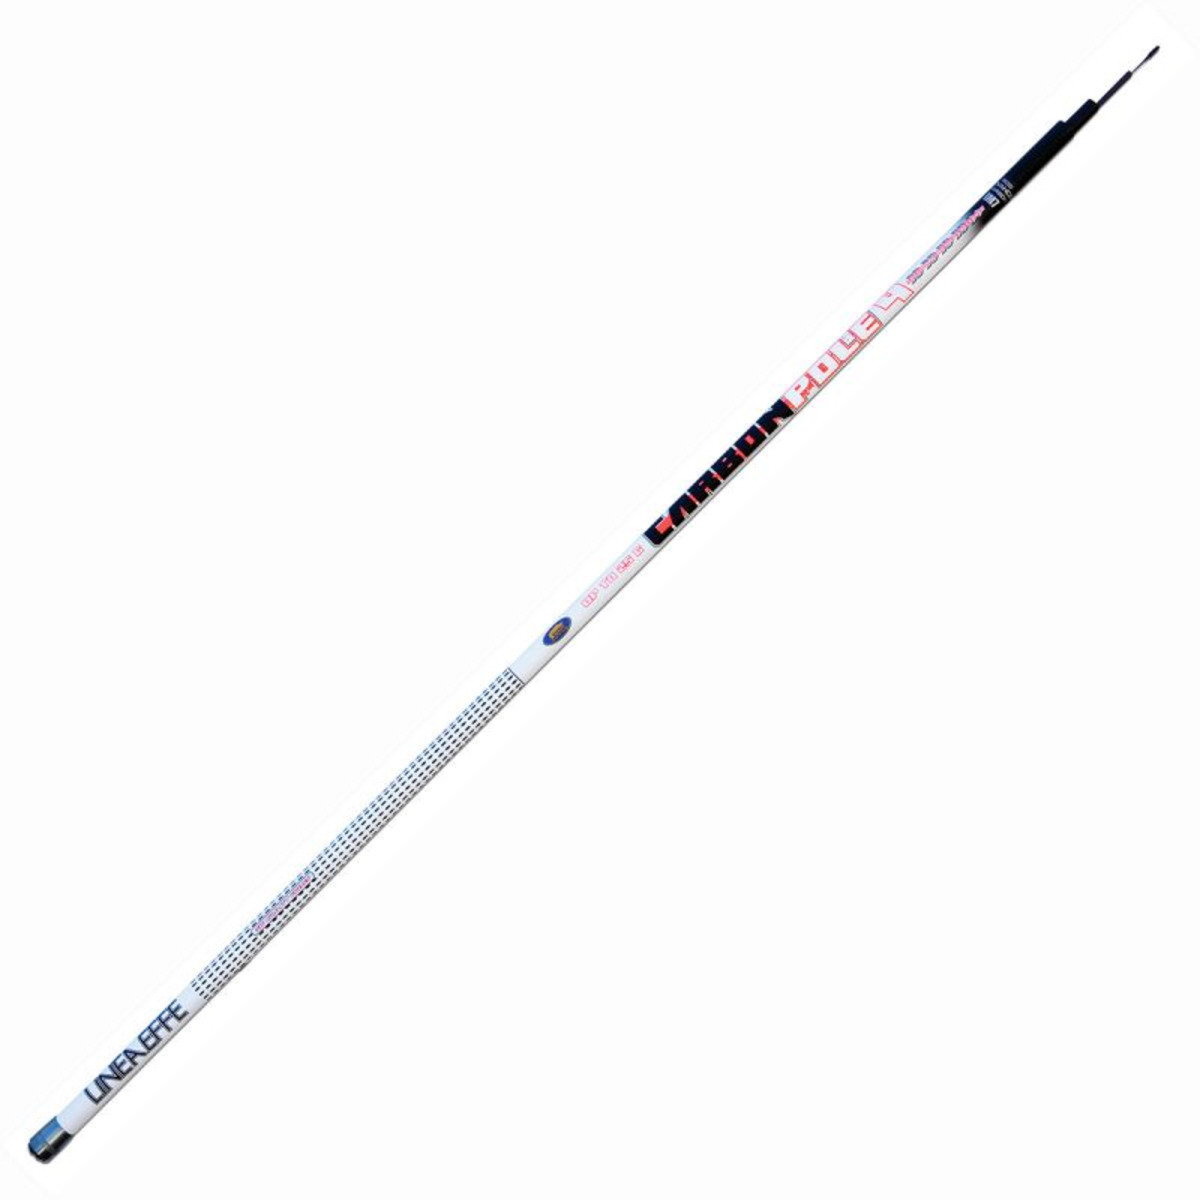 Lineaeffe Carbon Pole - 4.00 m - up to 25 g